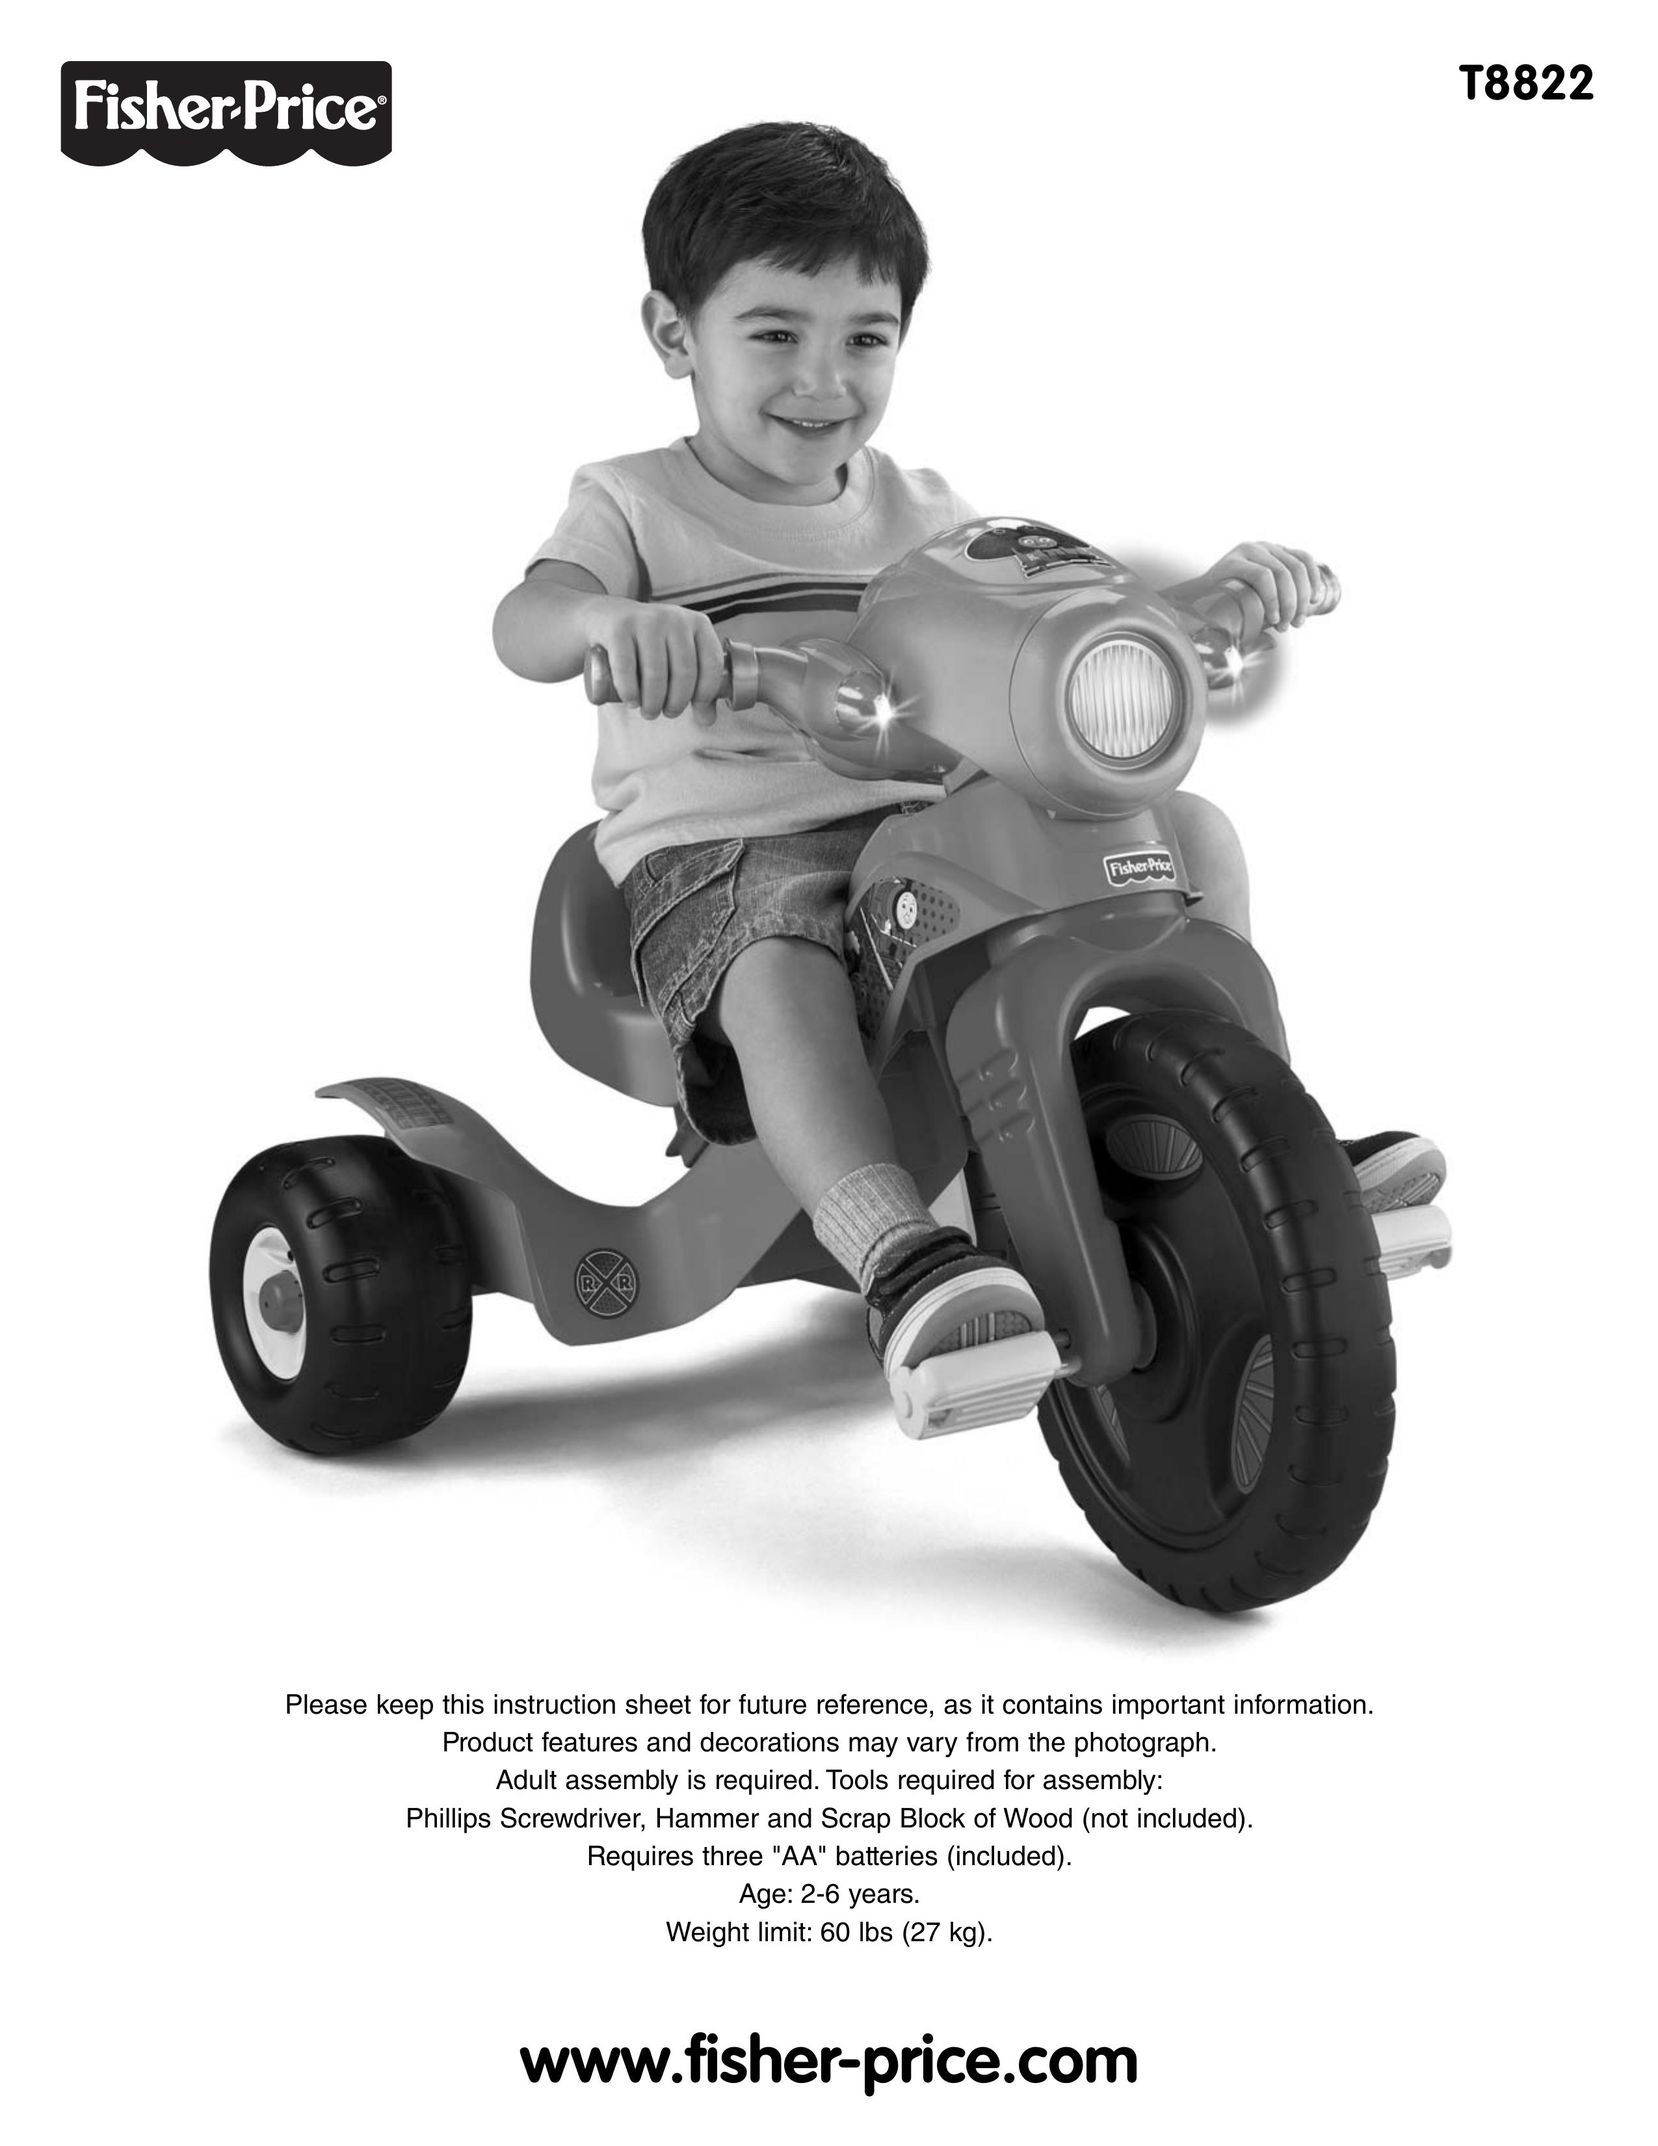 Fisher-Price T8822 Riding Toy User Manual